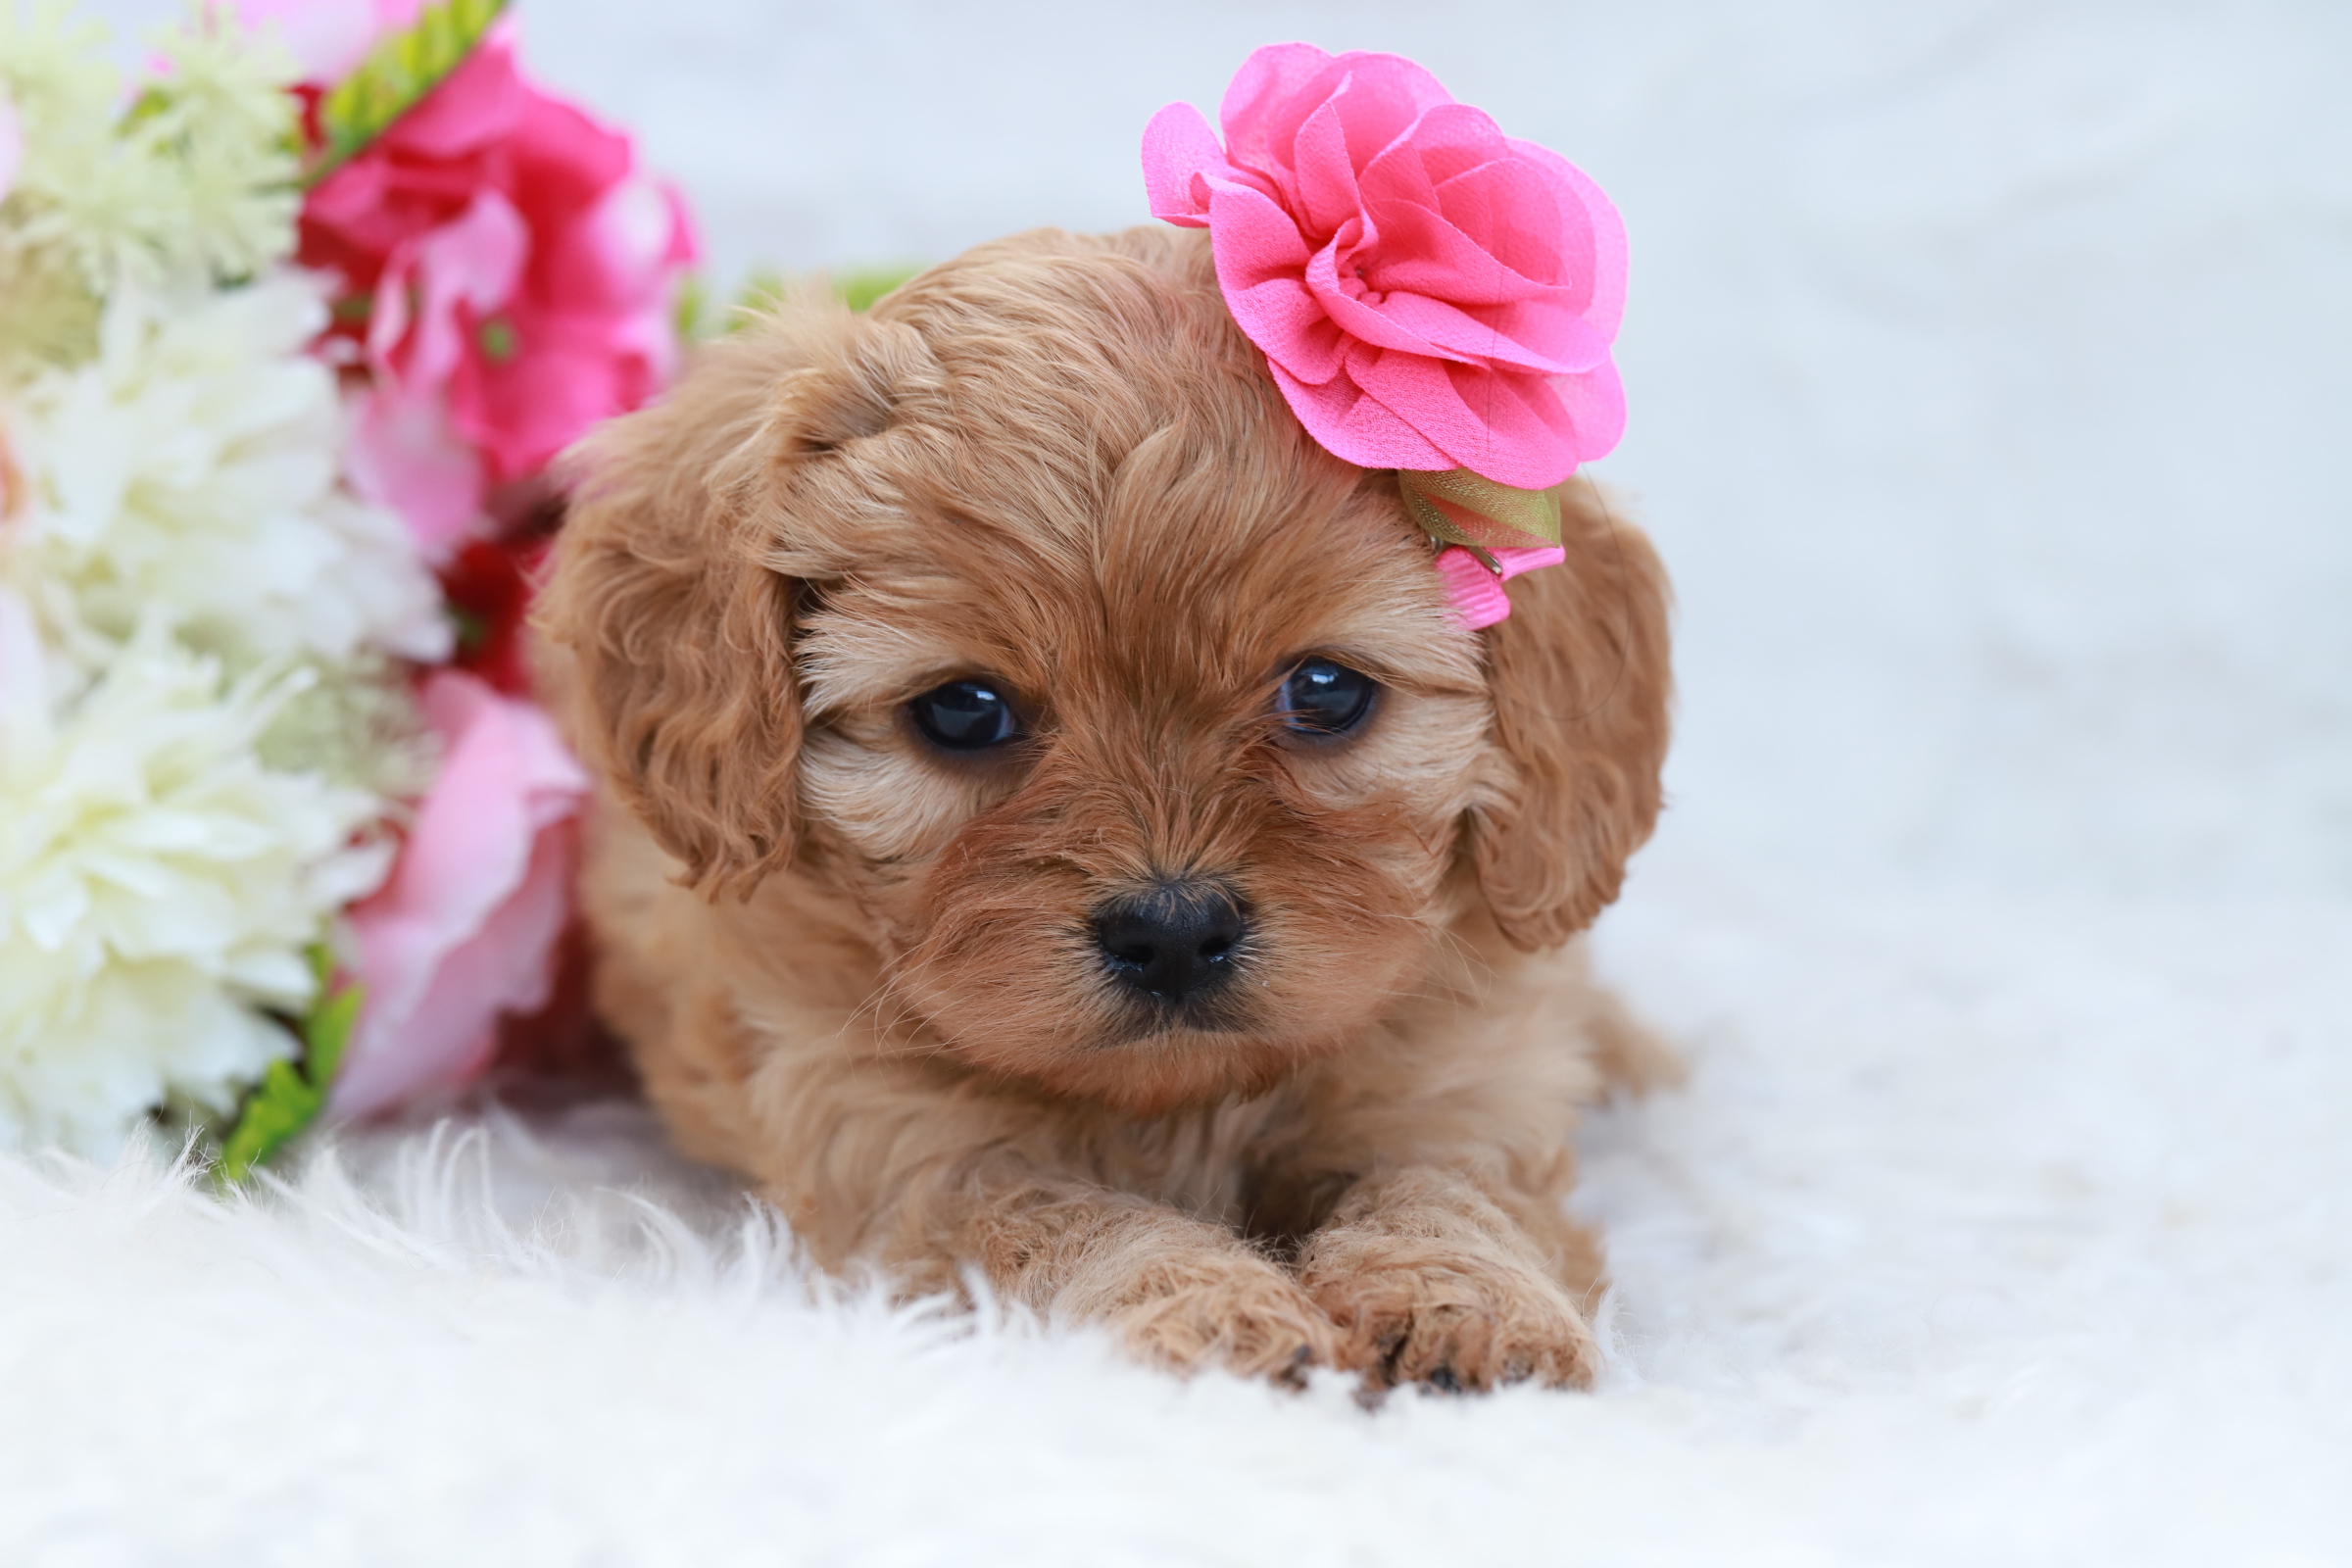 what are cavoodle puppies